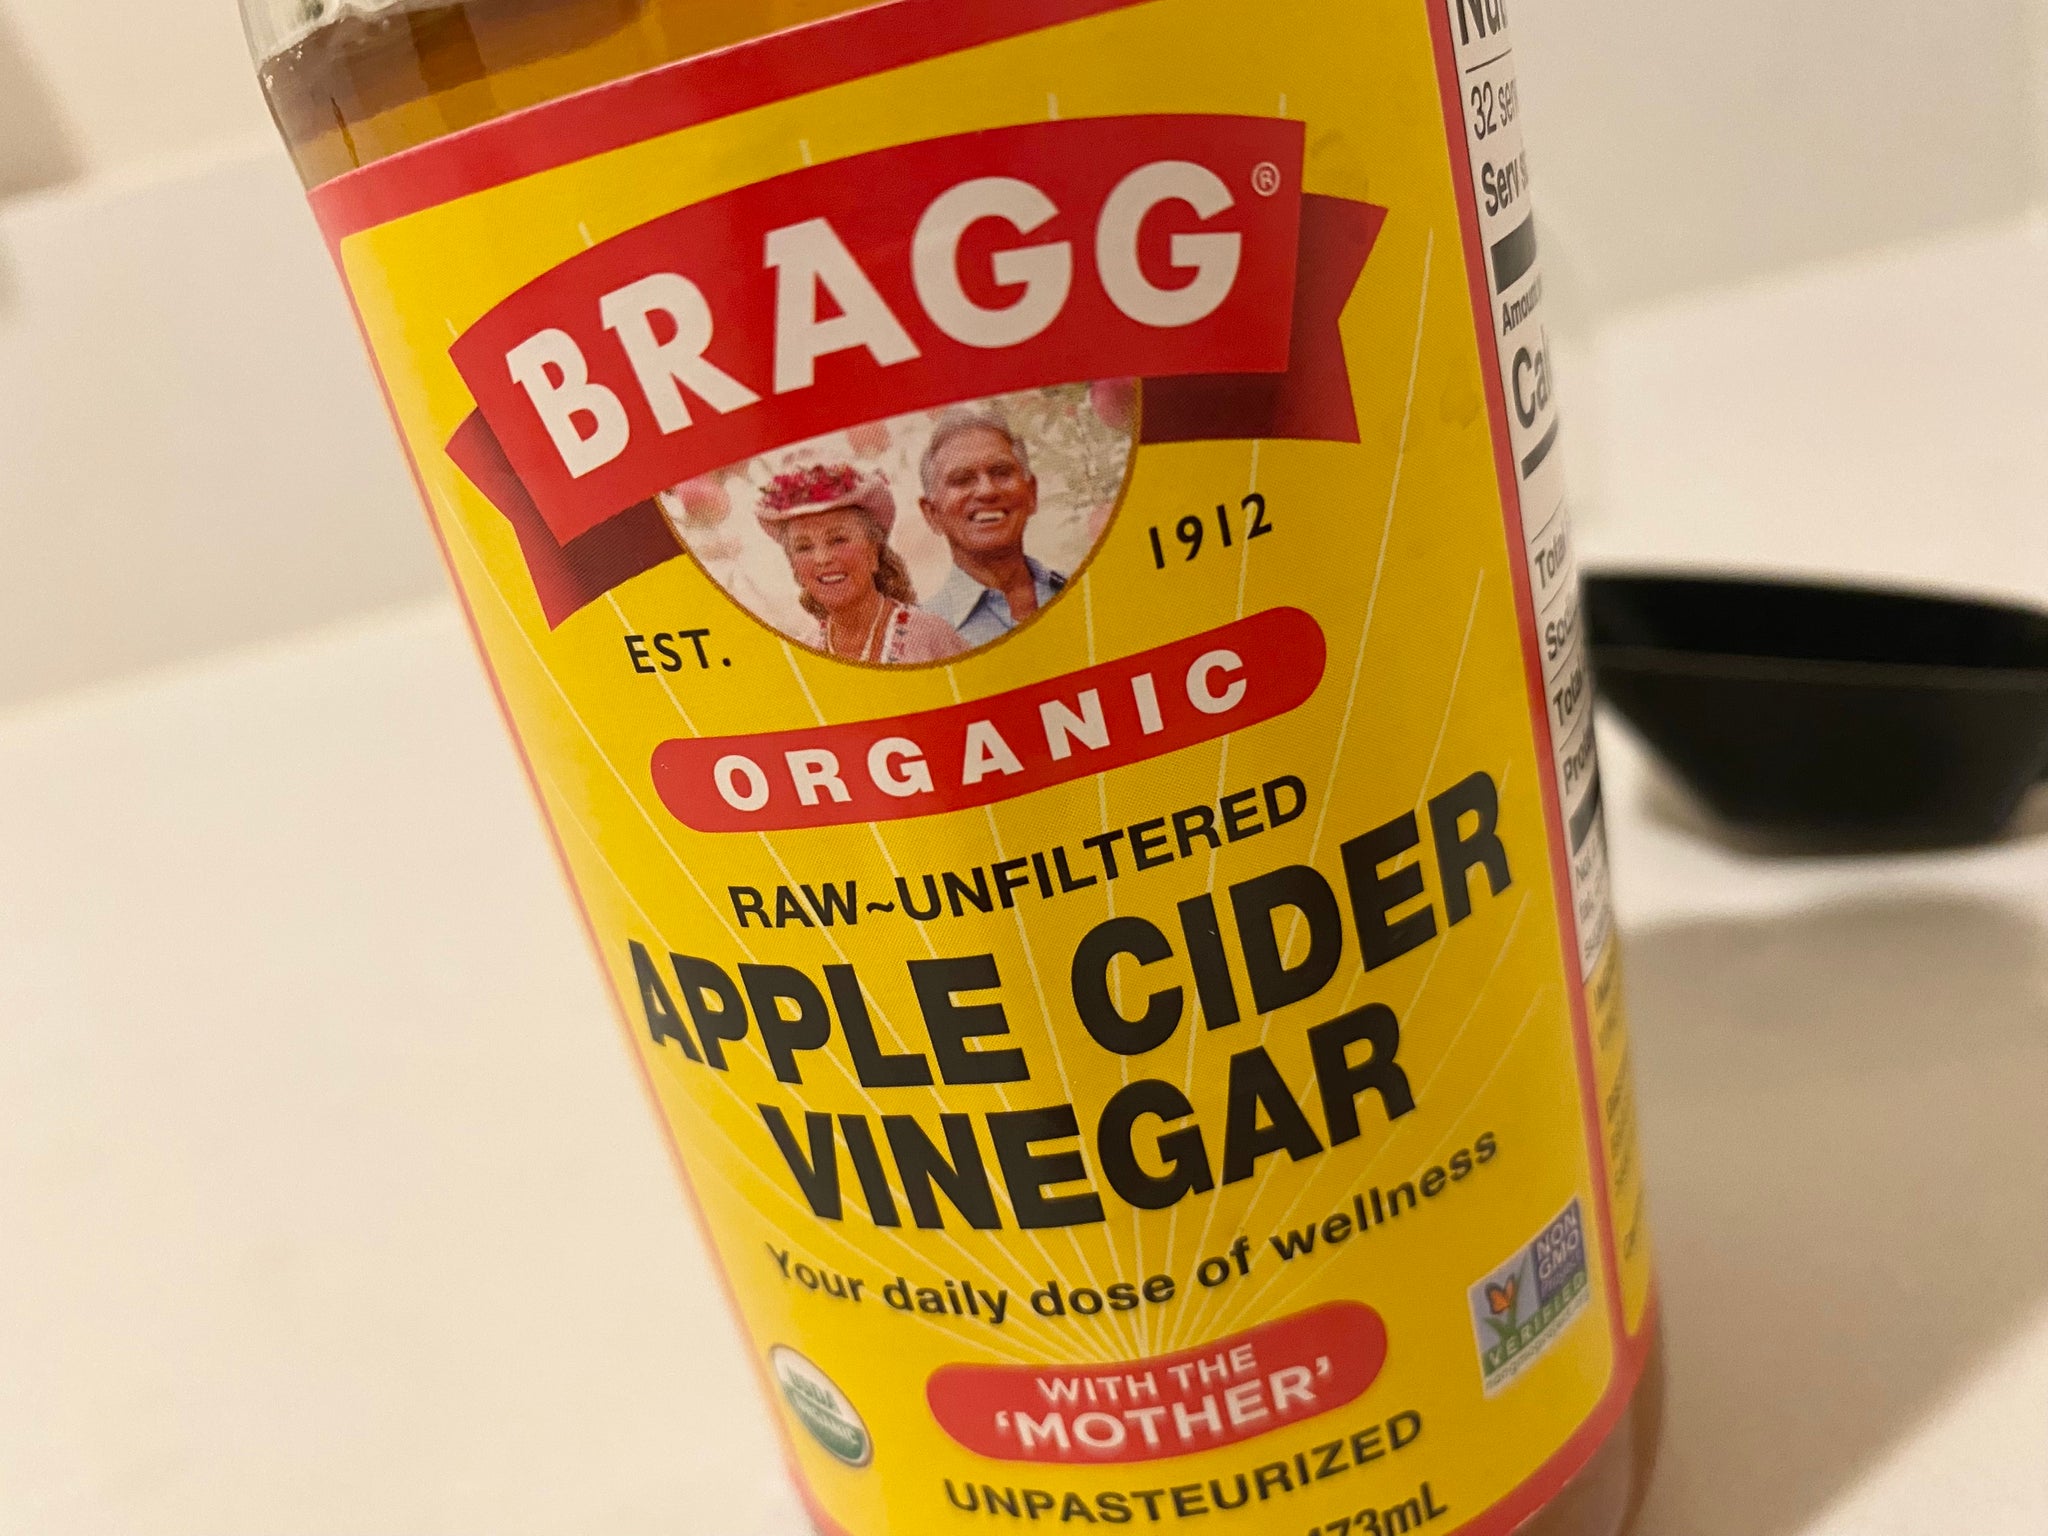 How to Use Apple Cider Vinegar for Greasy Hair